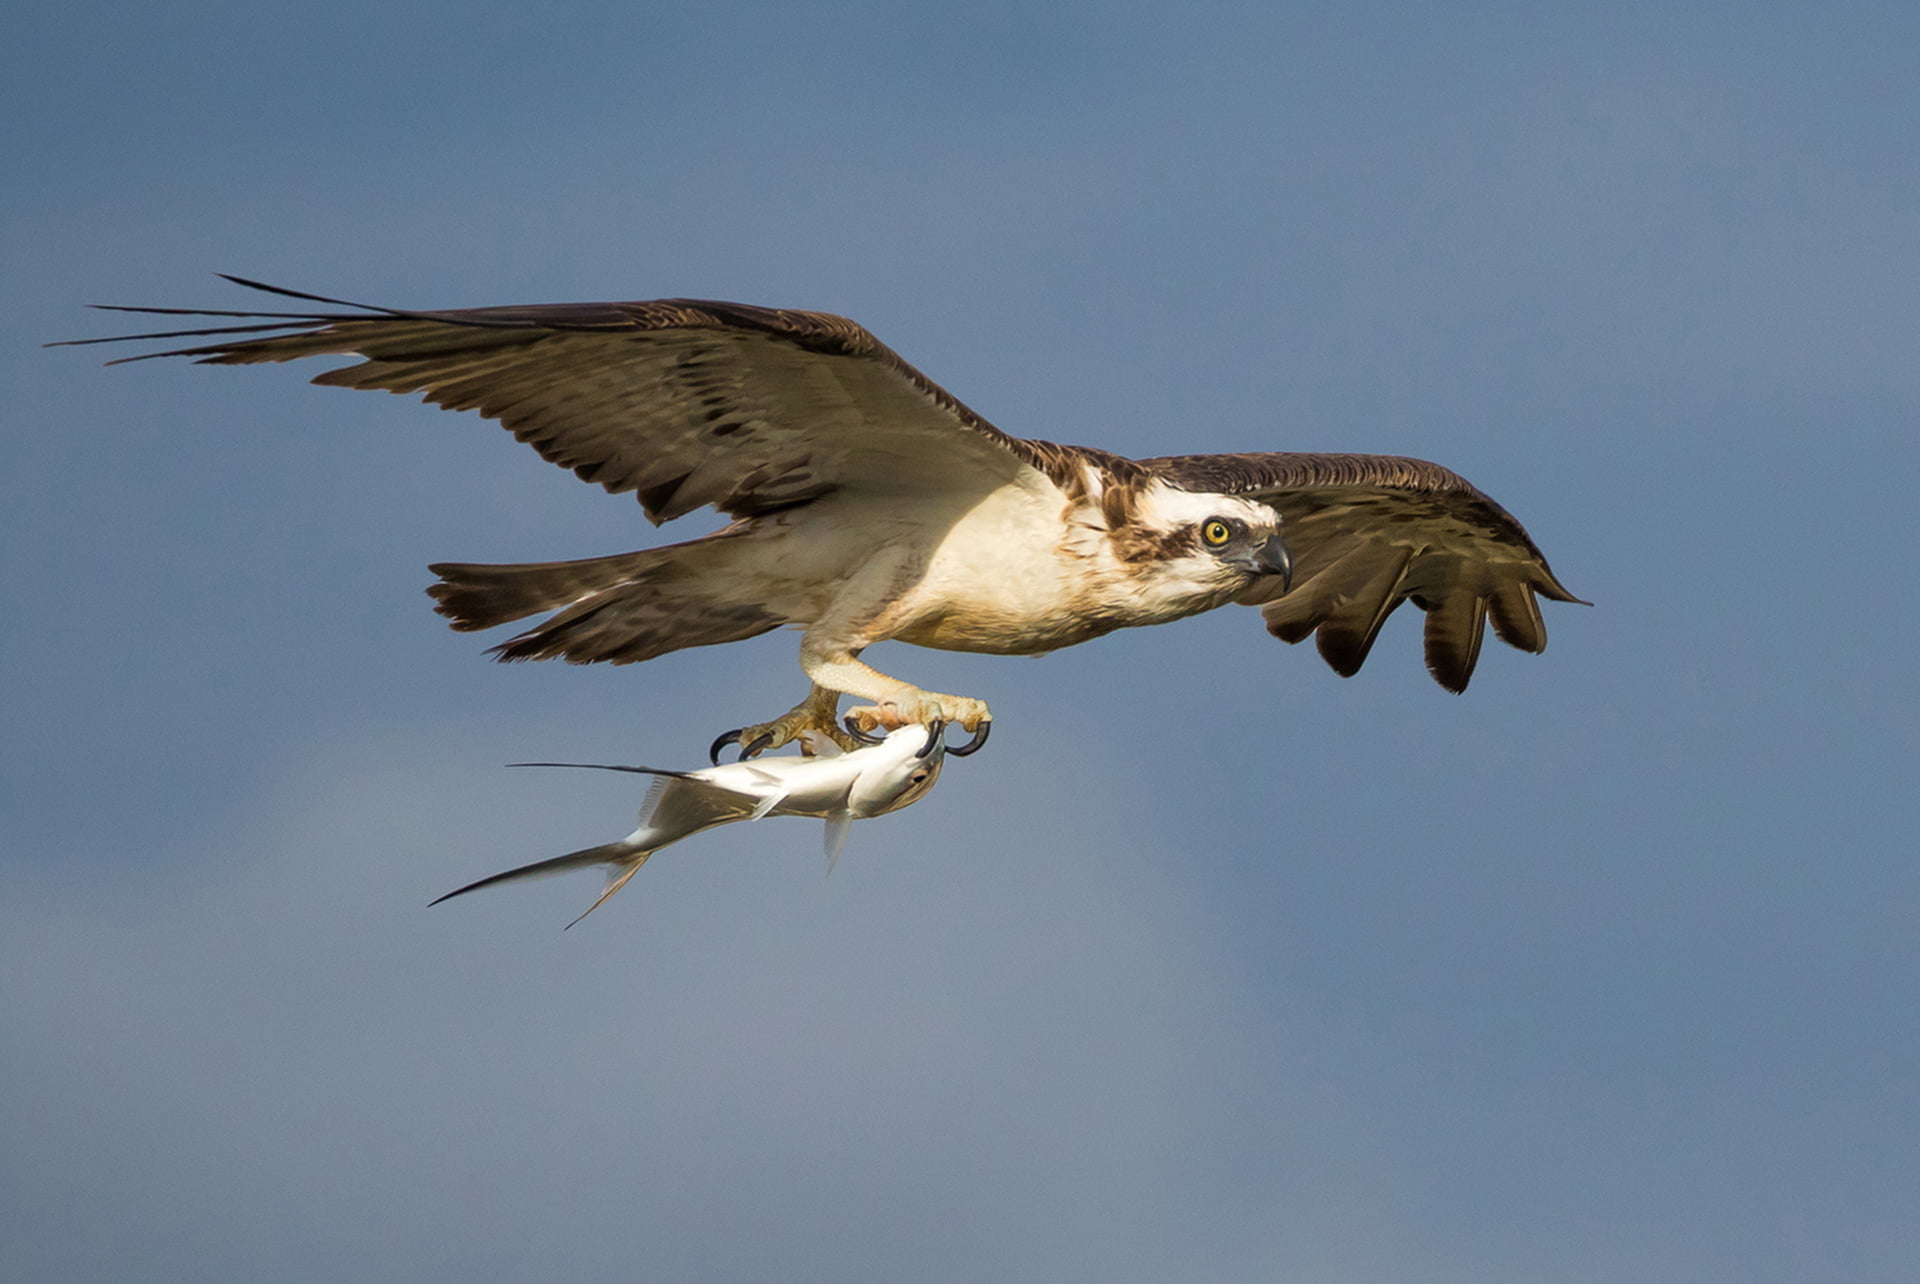 This Eastern Osprey (Pandion cristatus) was heading back to his nest with his prize catch (A swallow tail or Trevaly). I have being photographing him for a few months and he appeared to do a circle over head before heading away - he seemed very chuffed with himself!